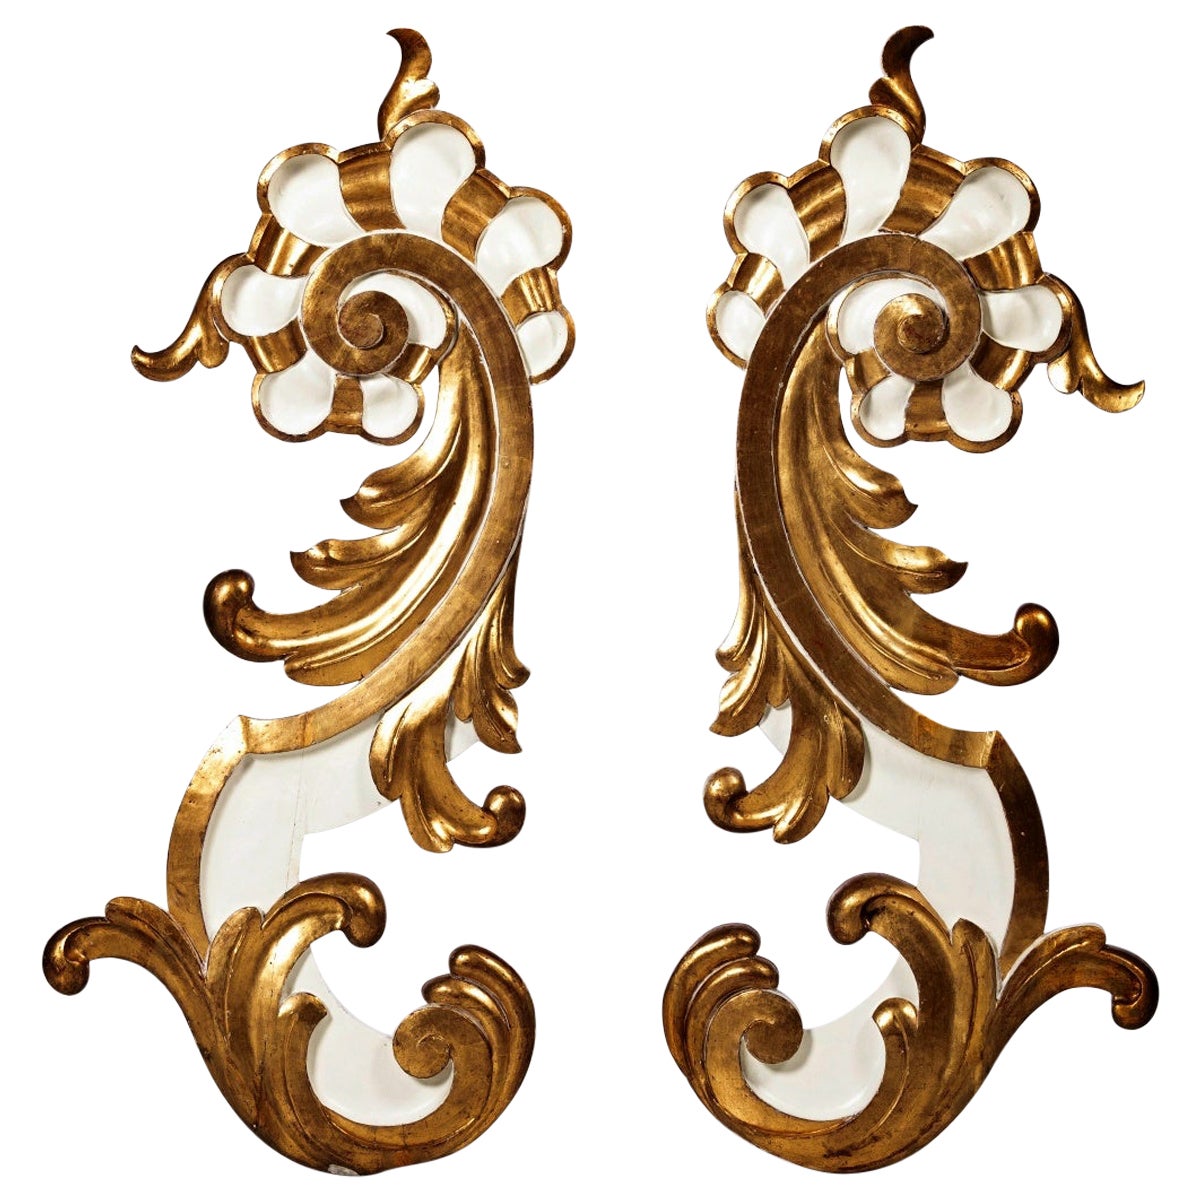 Pair of French Wood Carving Elements of the 18th Century For Sale